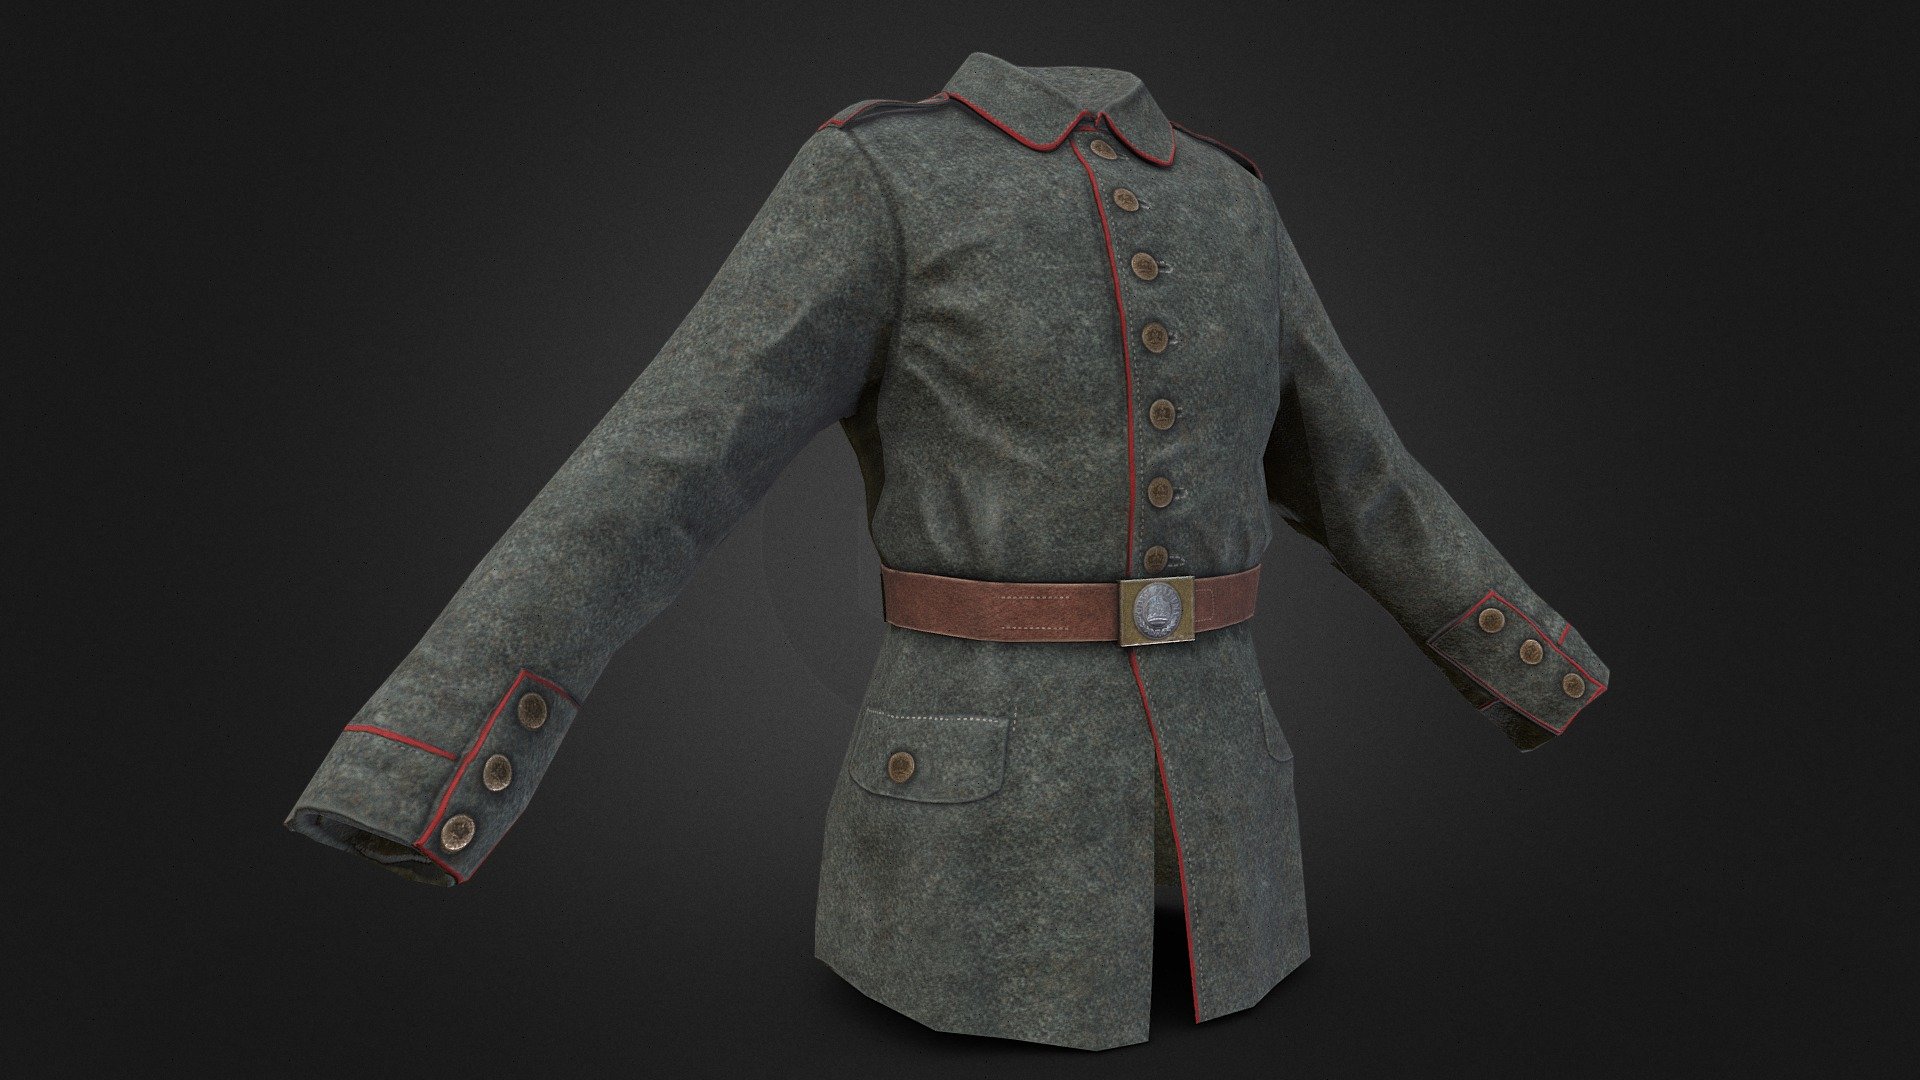 Thhe model1907/10 (here, the 1913 Landsturm cut) represented the main tunic of a german foot soldier's unifrom at the start of the first world war (1914). This version is specific to the Mannschaften, Other Ranks, of the Prussian Army (Buttons and Buckle, red piping everywhere with Brandenburg cuffs). The tunic went trhough considerable changes due to the war, removing decorative elements, making it cheaper to produce. A M15 blouse was introduced in 1915 with a simpler design, no visible buttons and no pipping.

Good sources: https://www.kaisersbunker.com/gtp/m10feldrock.htm
https://www.youtube.com/@PLWReview - German WW1 Tunic [Model 1907/10 Feldrock] - Buy Royalty Free 3D model by Vasikle (@someobne) 3d model